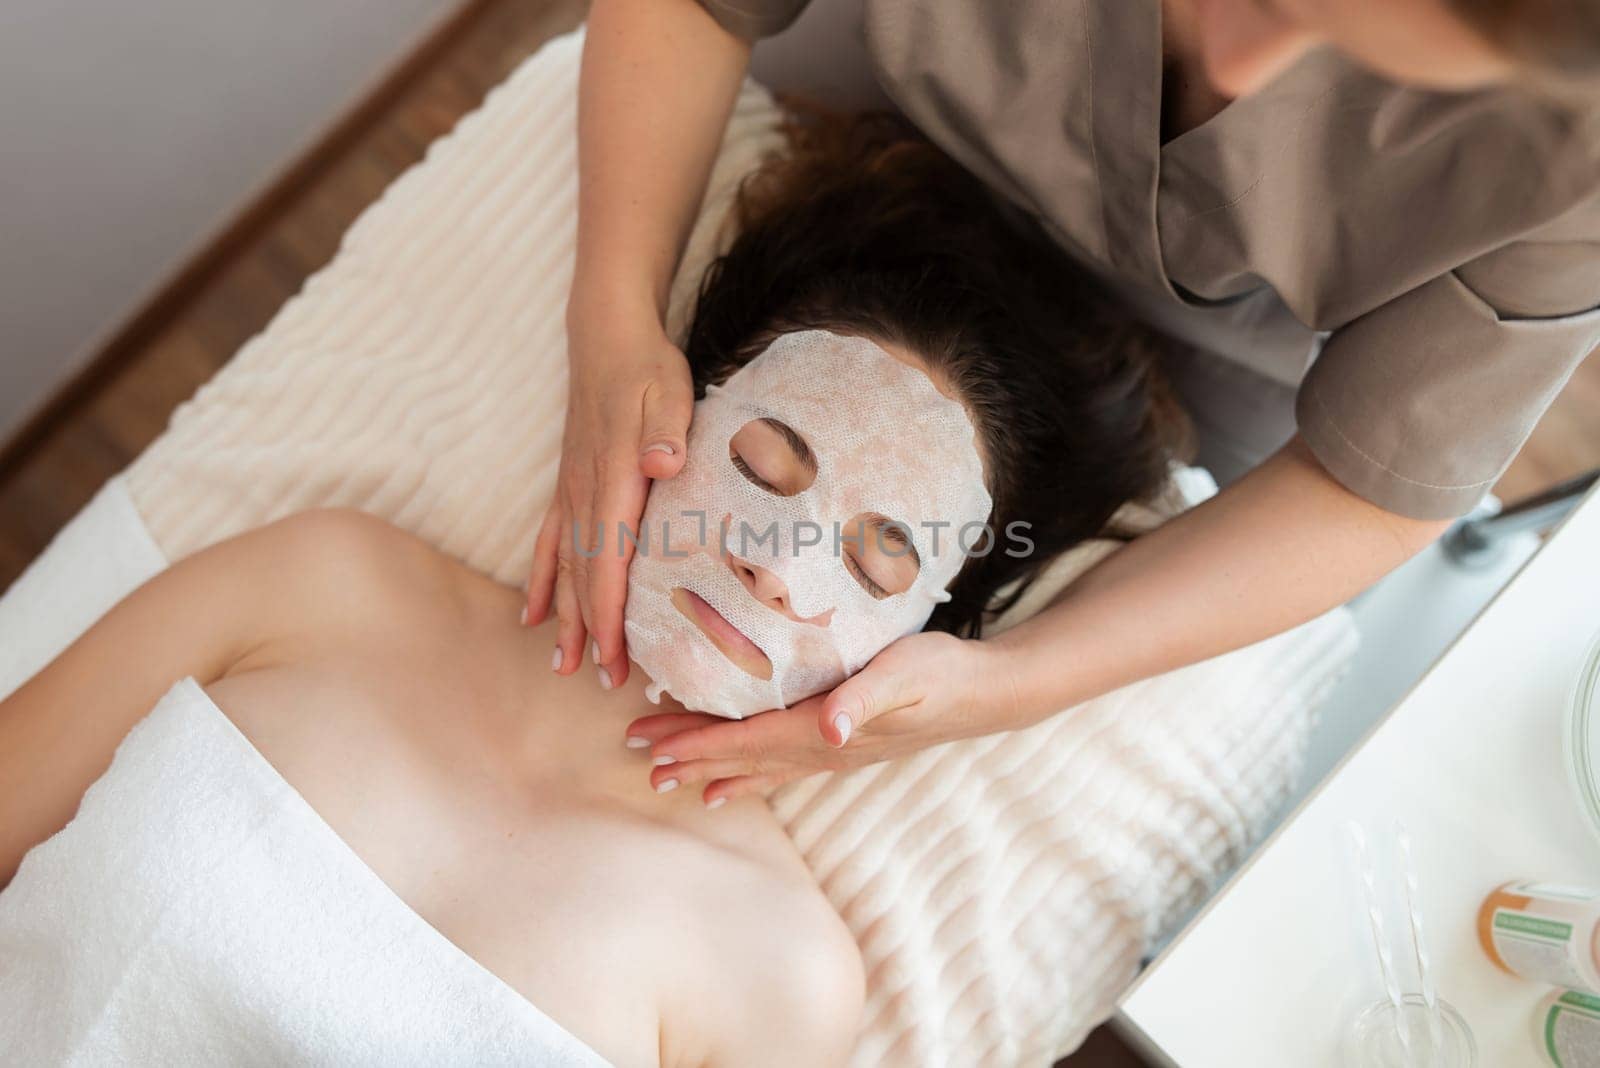 Skincare and treatment in beauty salon, spa procedures